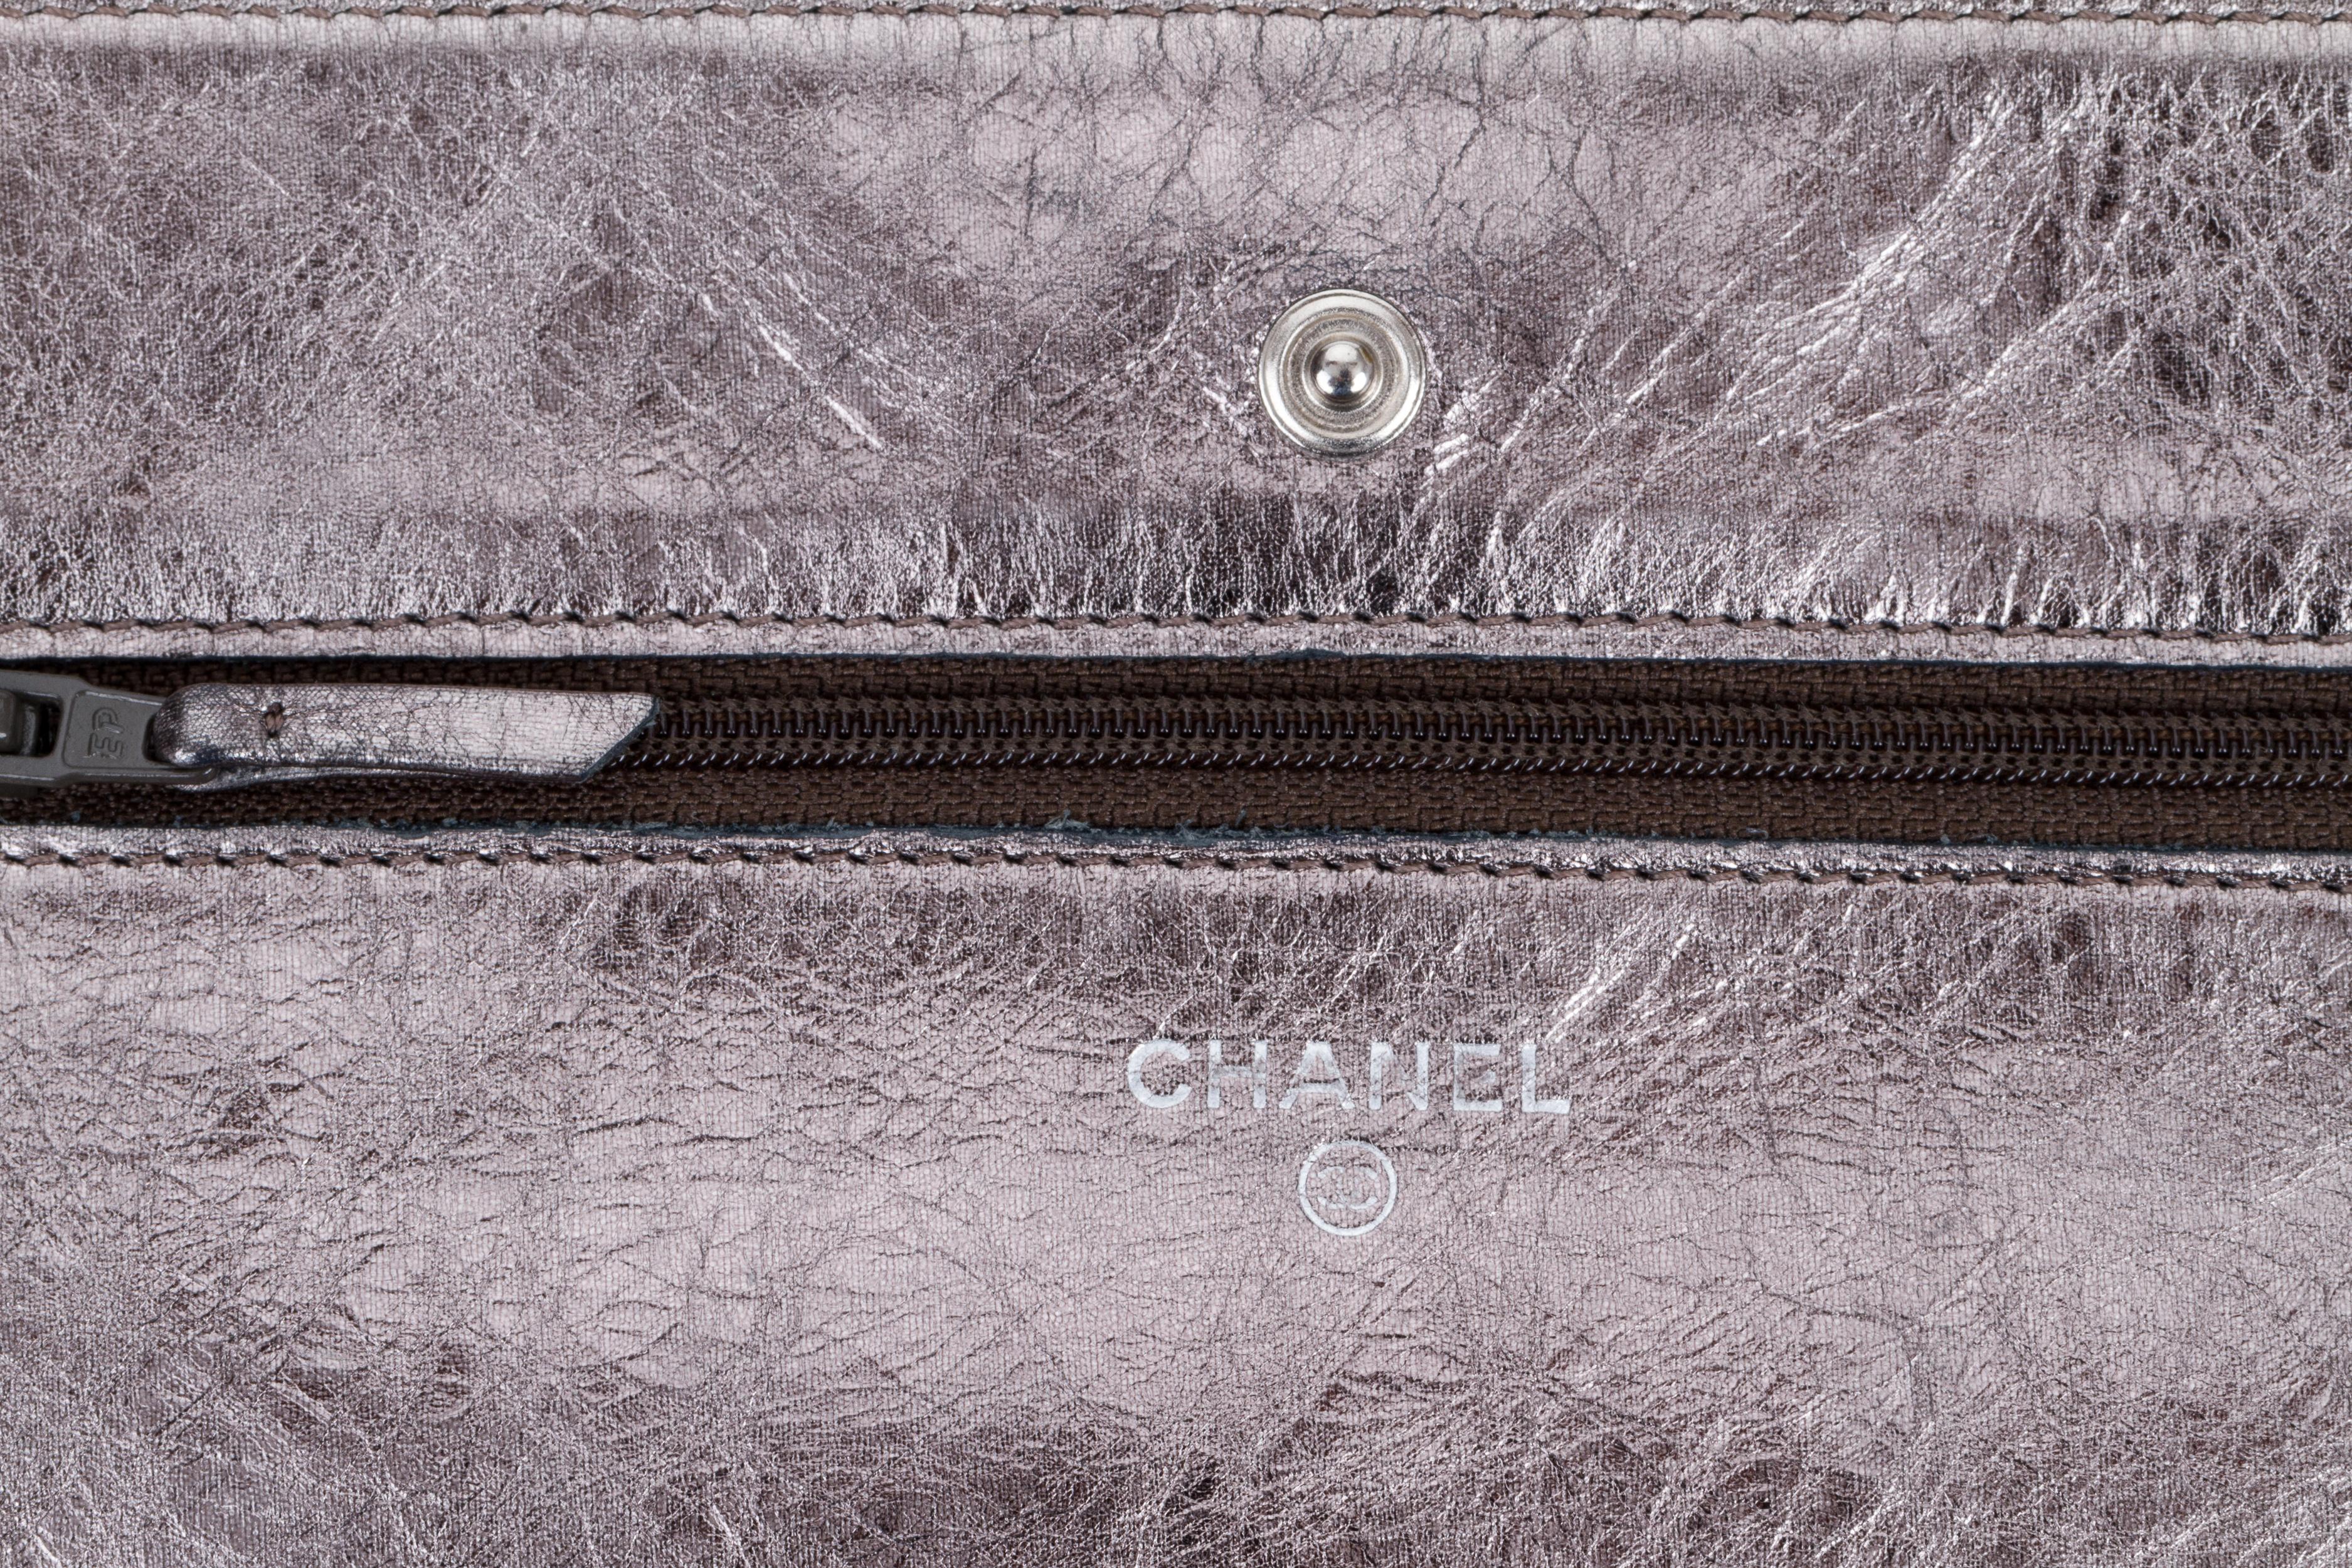 Women's Chanel Reissue Pewter Wallet On A Chain Crossbody Bag